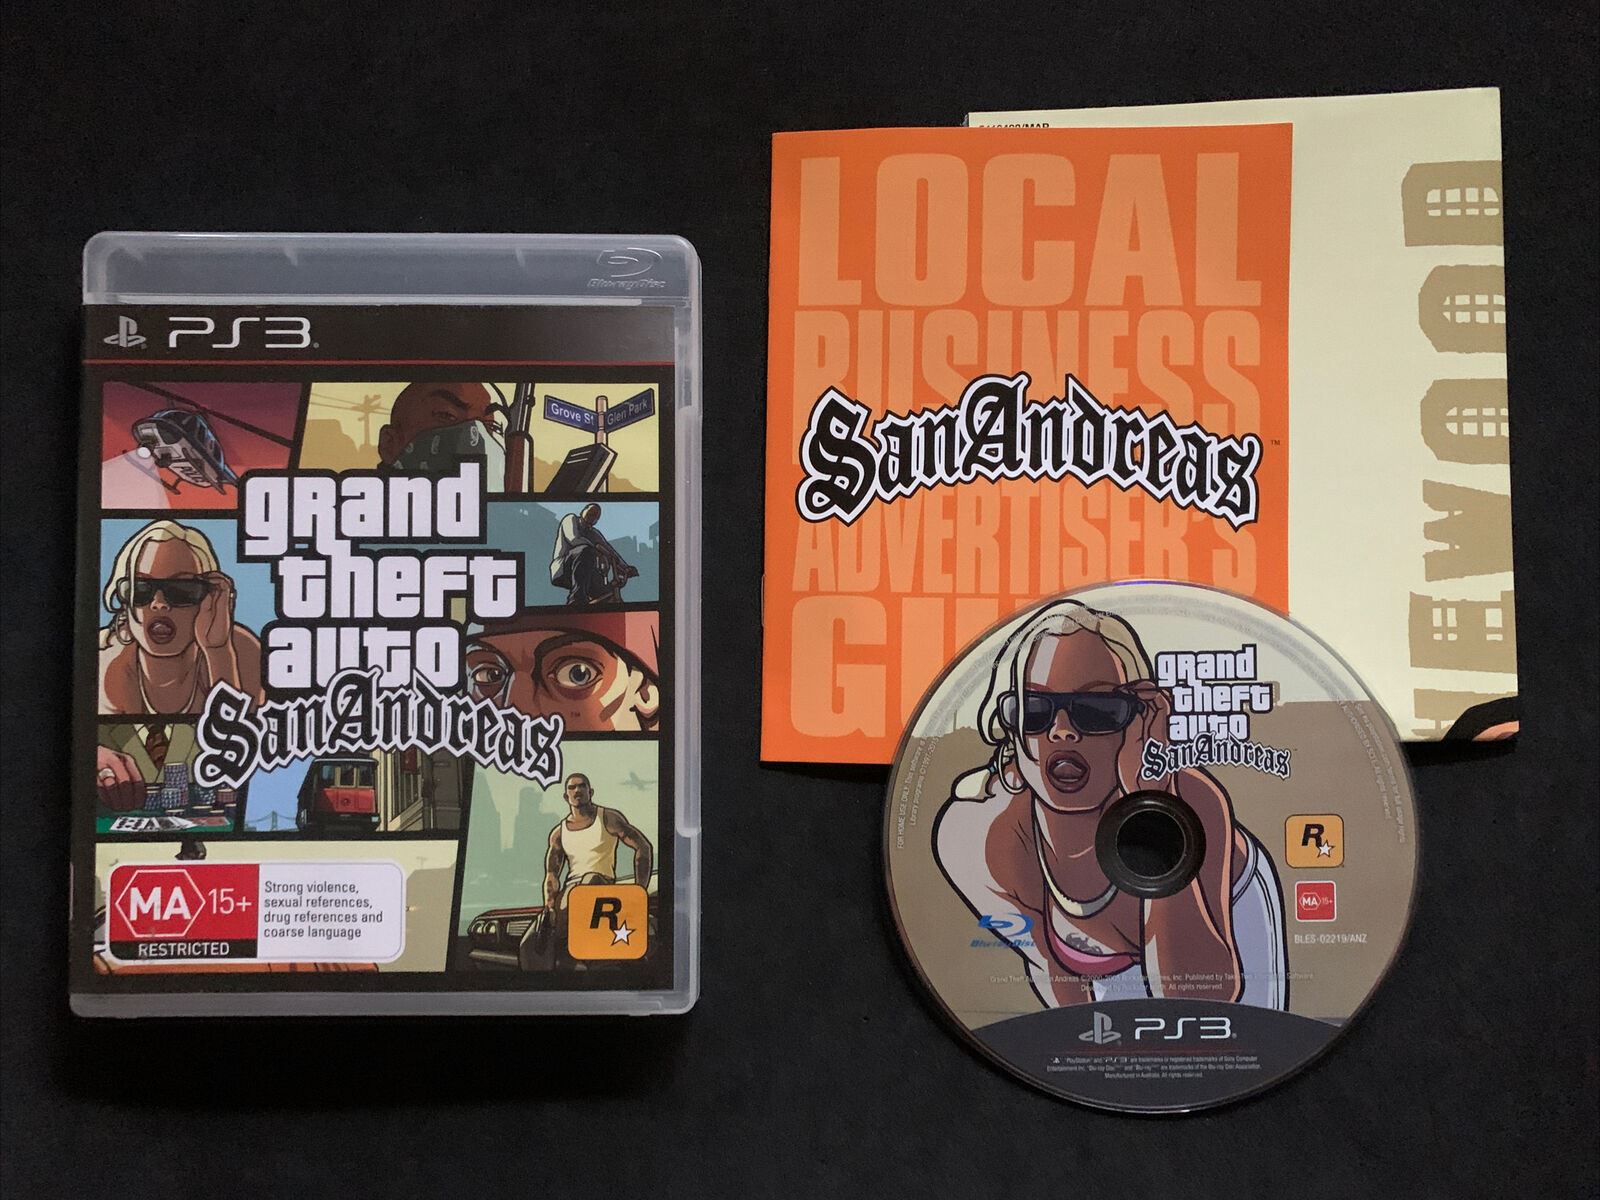 Grand Theft Auto: San Andreas makes a surprise debut on PS3 - Polygon